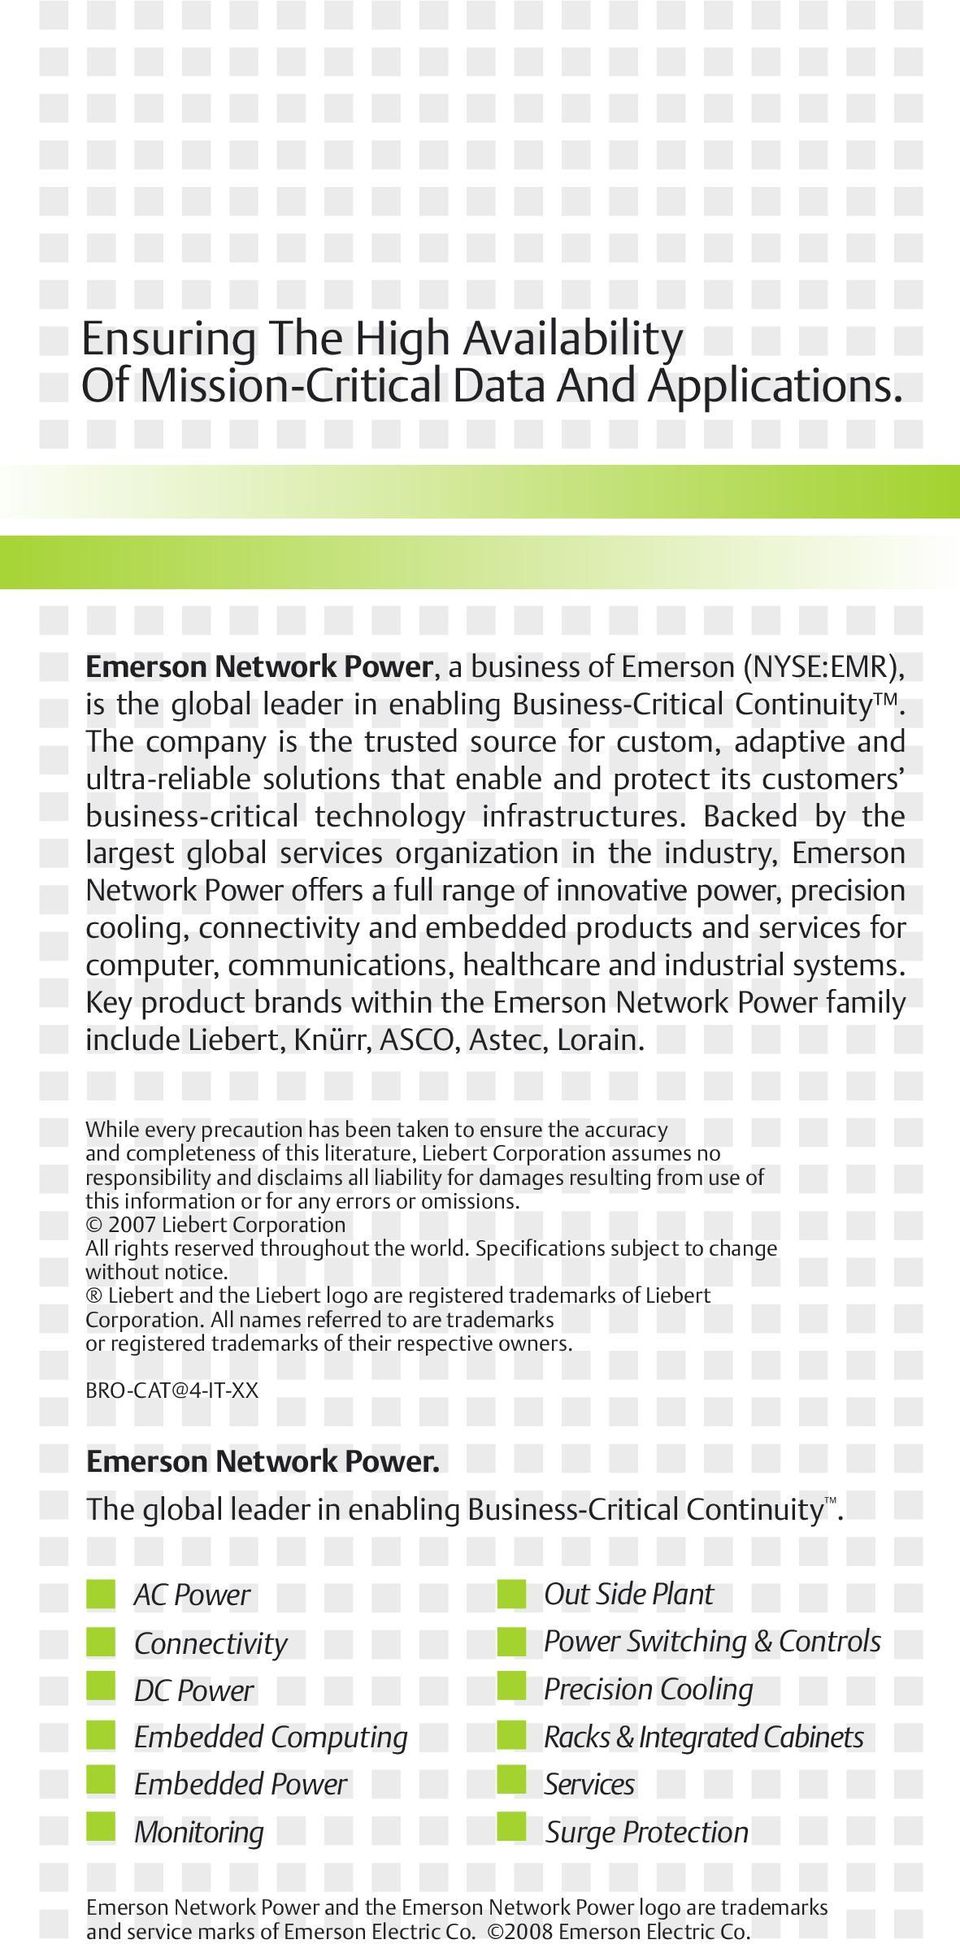 Backed by the largest global services organization in the industry, Emerson Network Power offers a full range of innovative power, precision cooling, connectivity and embedded products and services